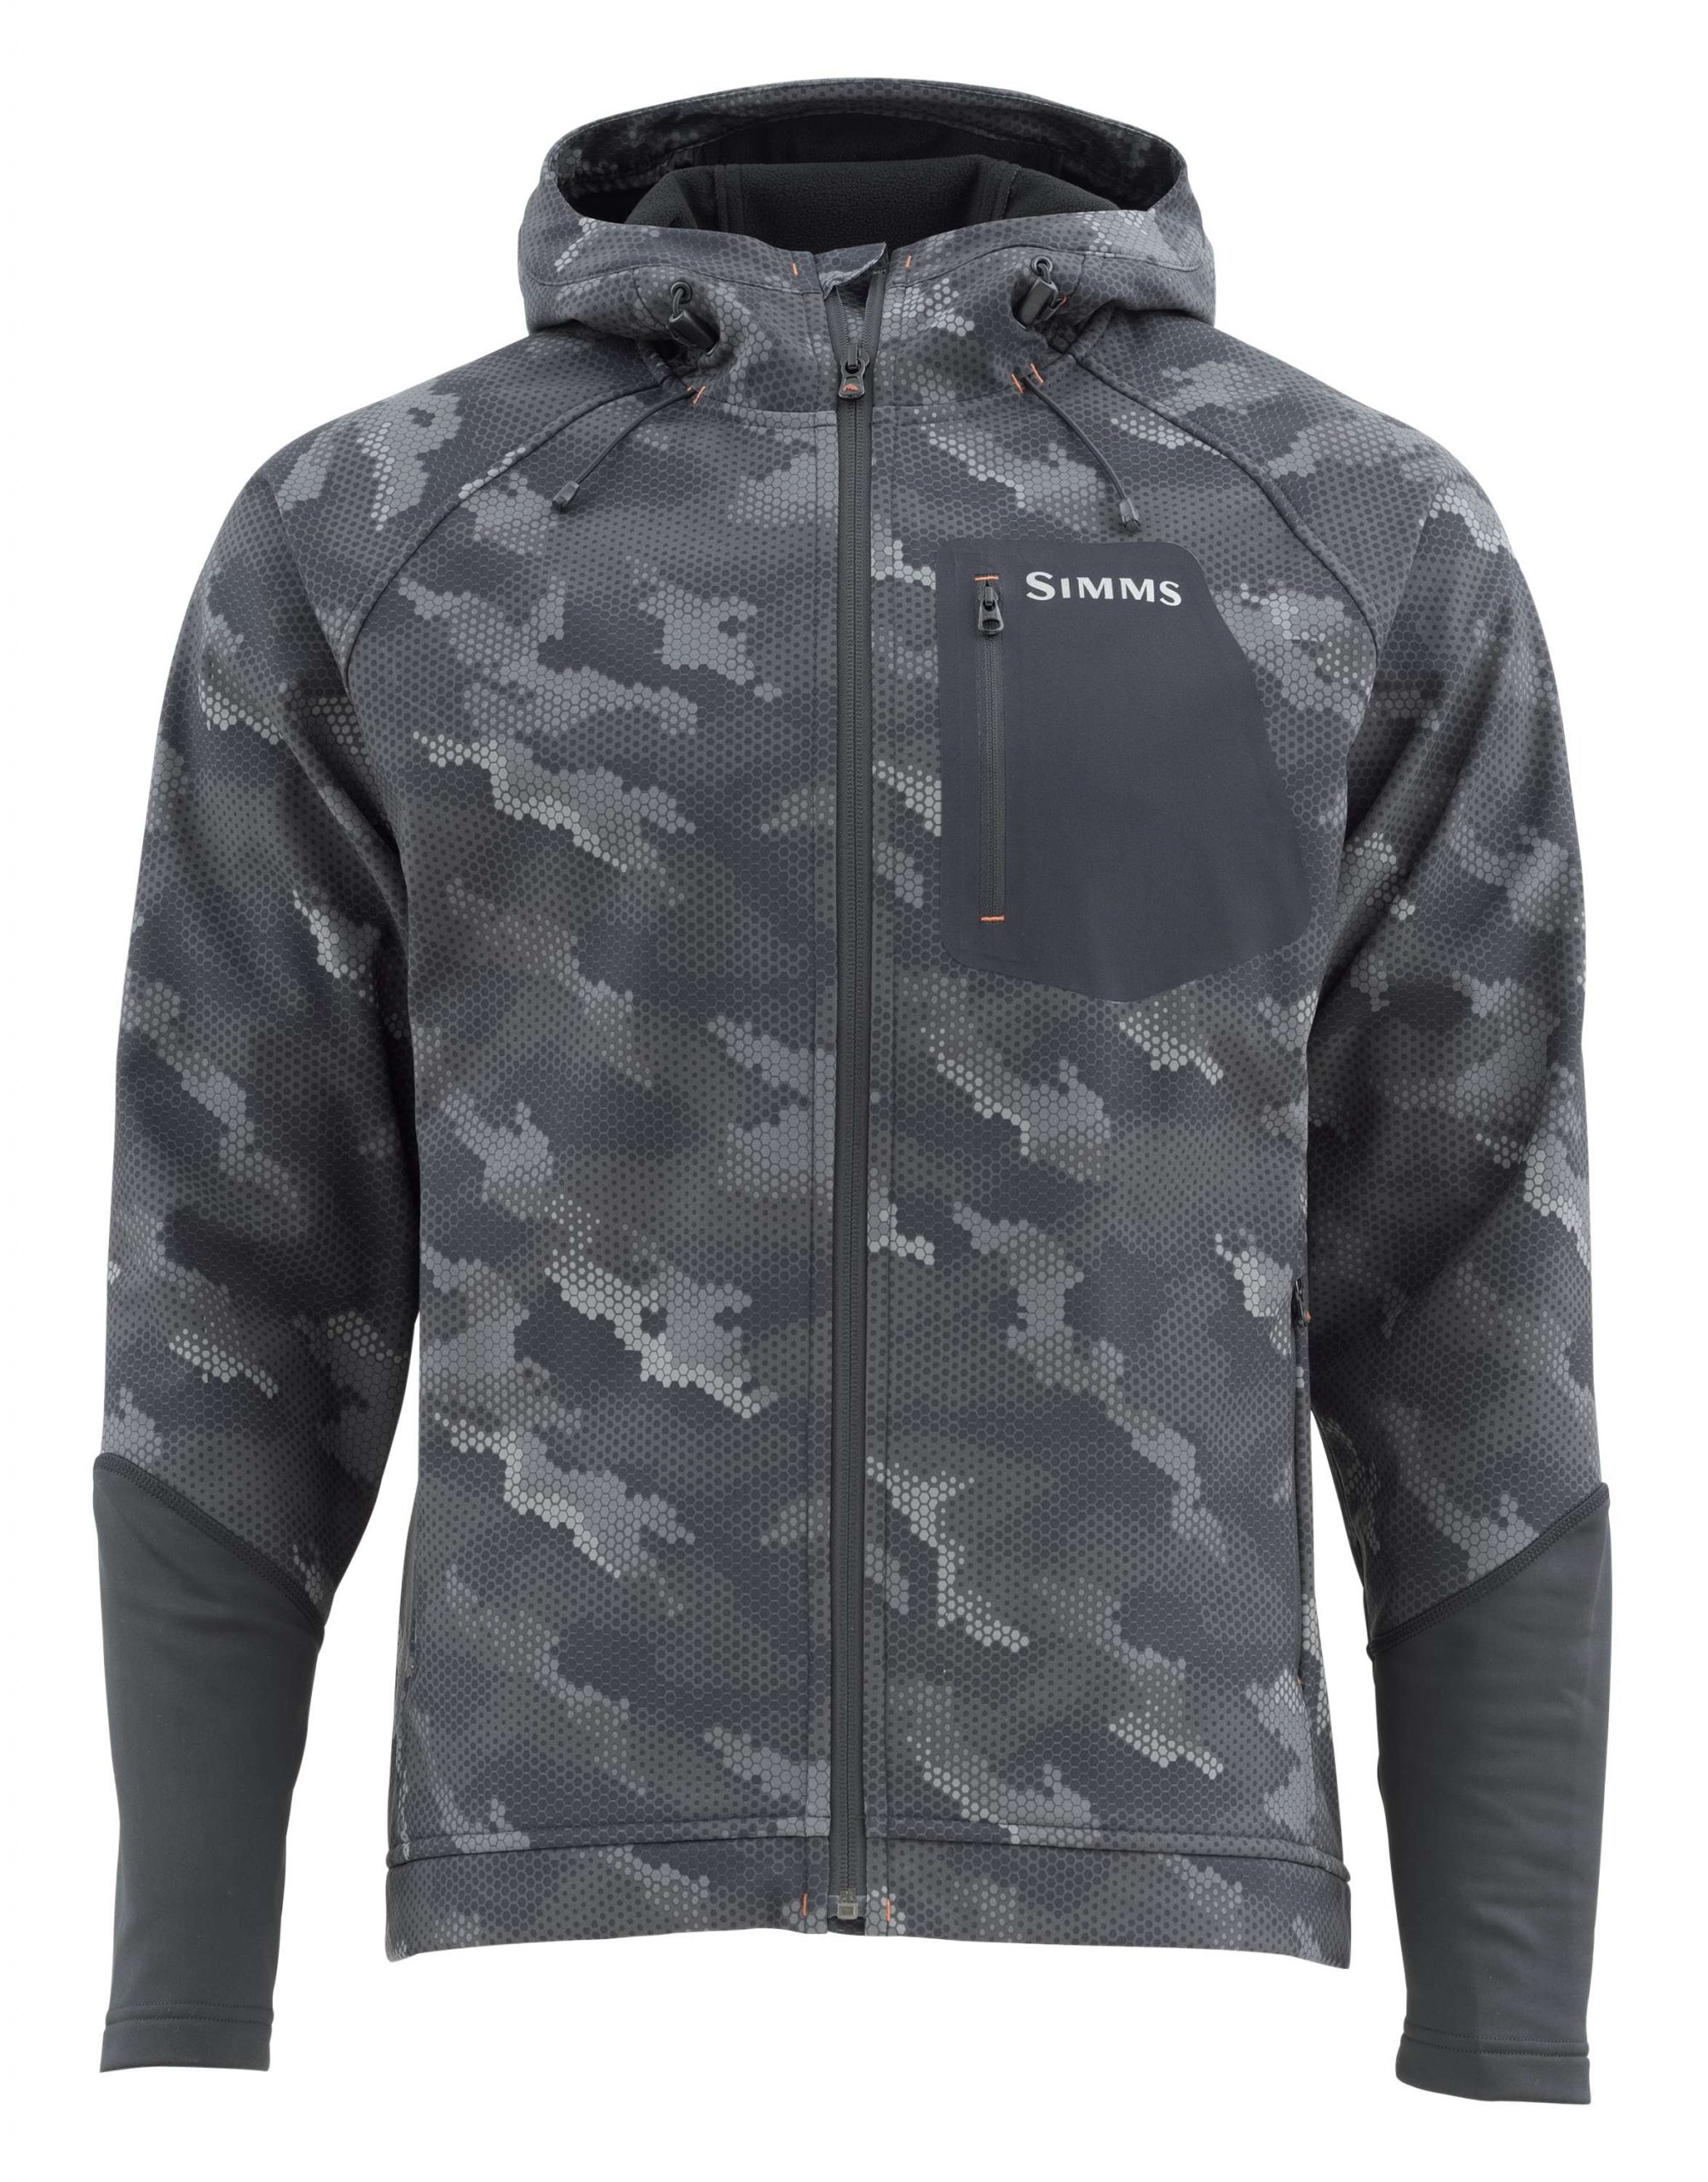 Katafront Hoody<br>
Simms	<br>
$129<br>	
From clouds to sun to showers, it's no secret that the weather is fickle and on a good day on the water you can see it all. The search for the layer that bridges all conditions is over. Our men's Katafront Hoody is a technical fishing jacket that meets all conditions. Layer it under a rain shell or wear it on its own on drier days. Watershedding forearms move in and out of the water while keeping you dry, and an adjustable hood provides shelter and warmth as needed. It's cut for a full range of motion with just the right amount of stretch.	